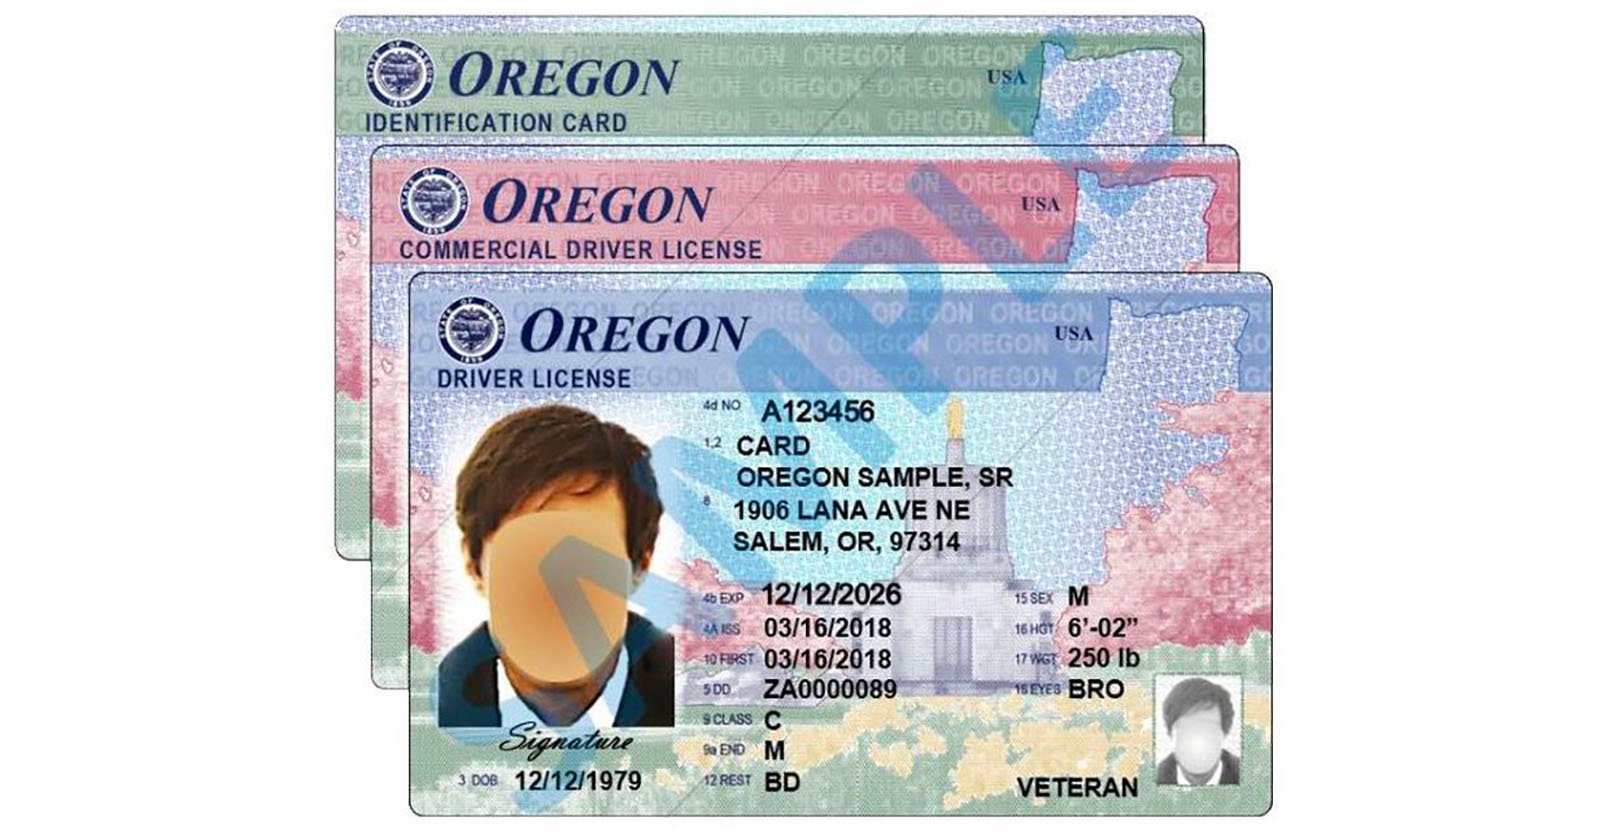 Statewide Camera Outage Leaves Oregonians Unable to Get ID Photos PetaPixel picture image